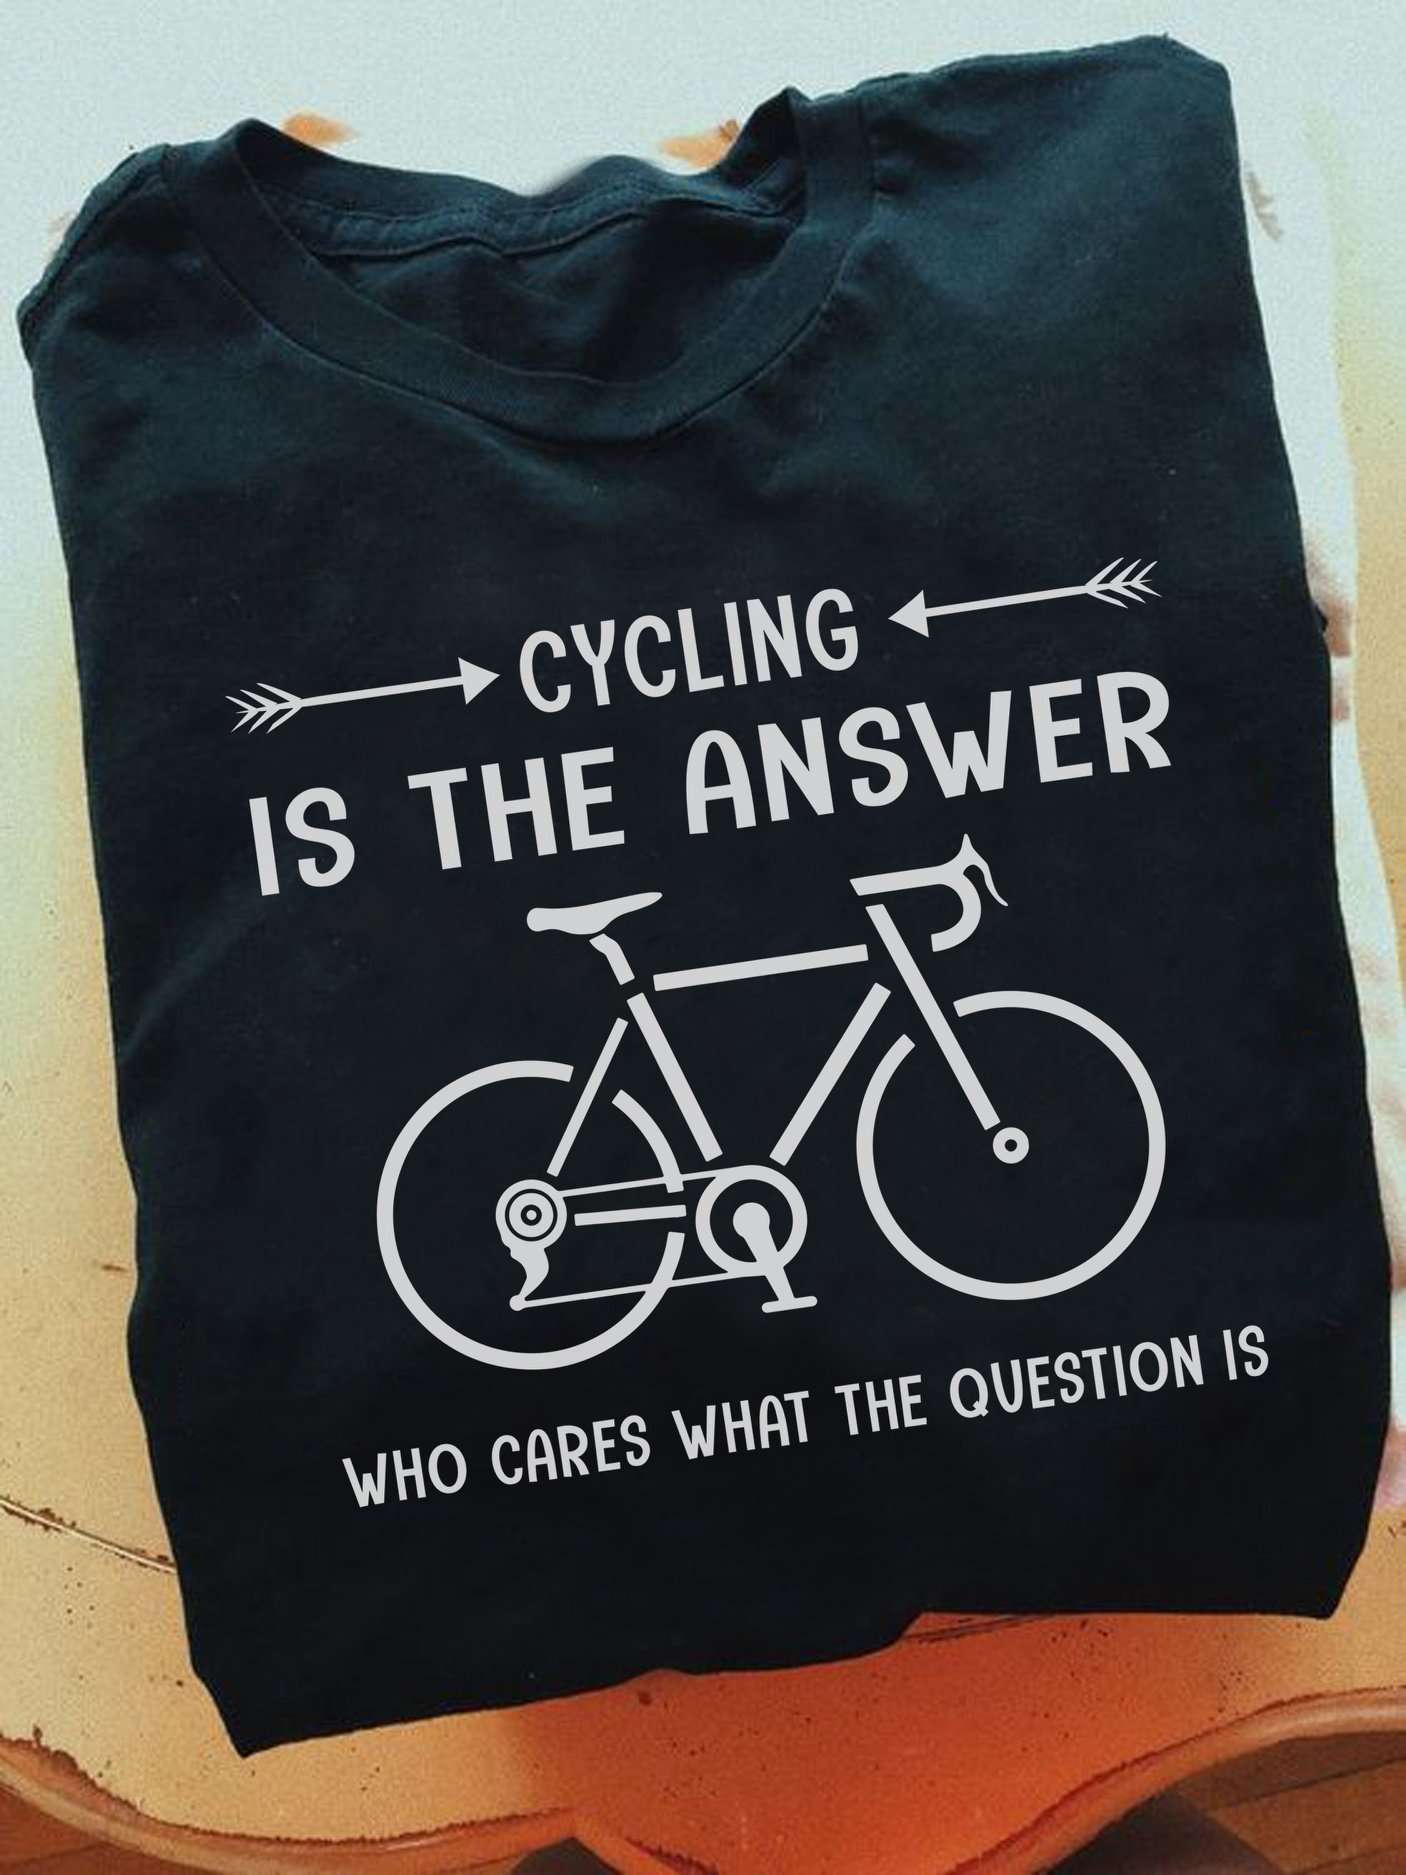 Love Cycling - Cycling is the answer who cares what the question is